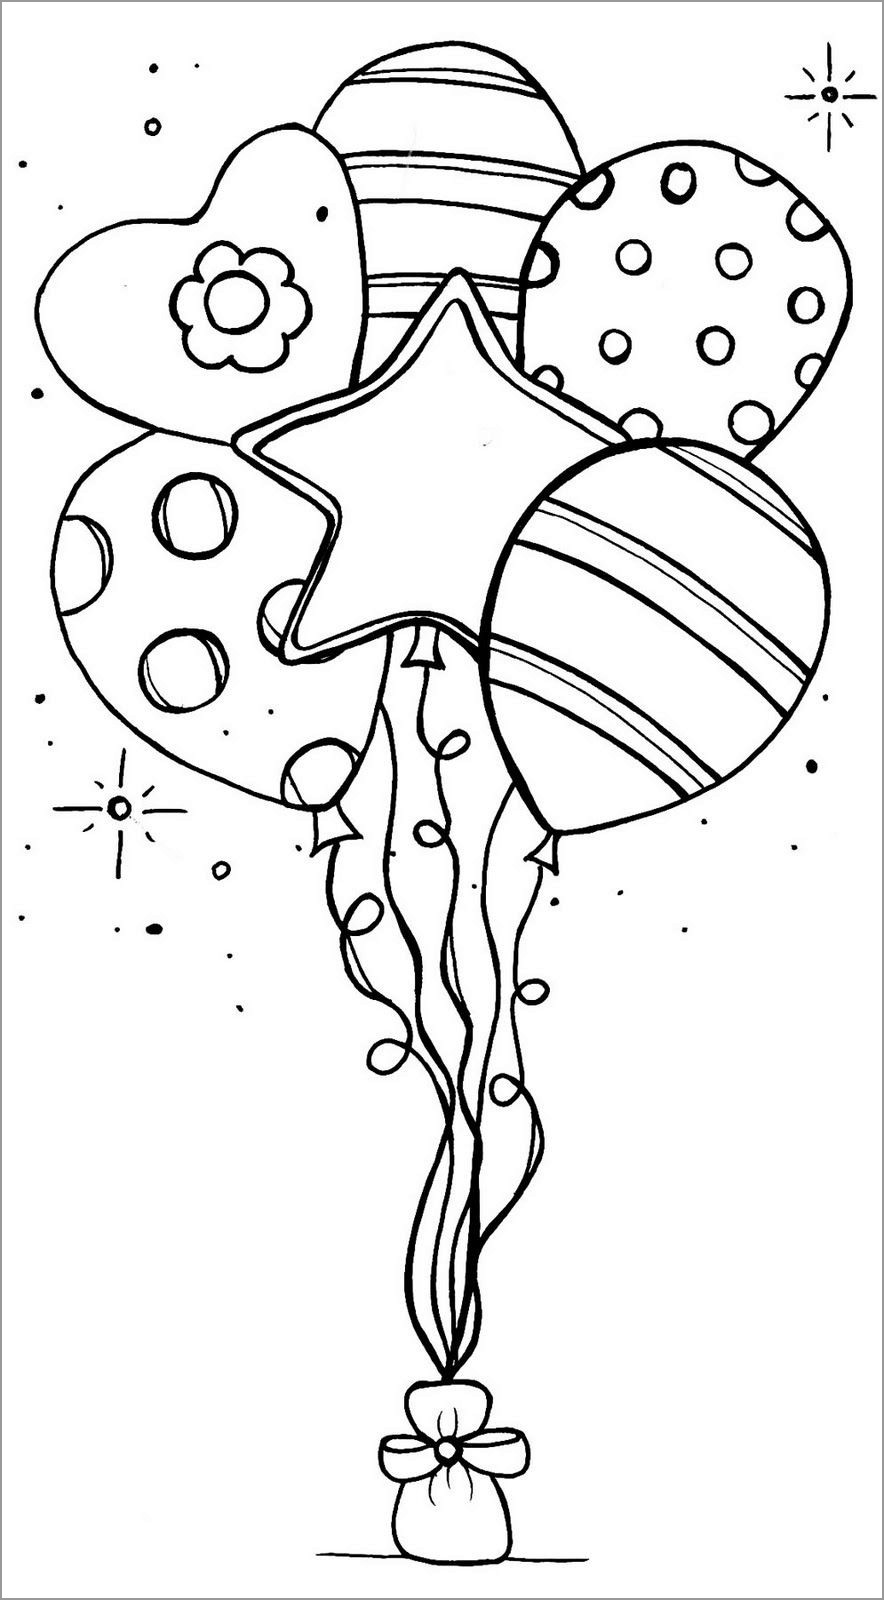 Download Balloon Coloring Pages - ColoringBay